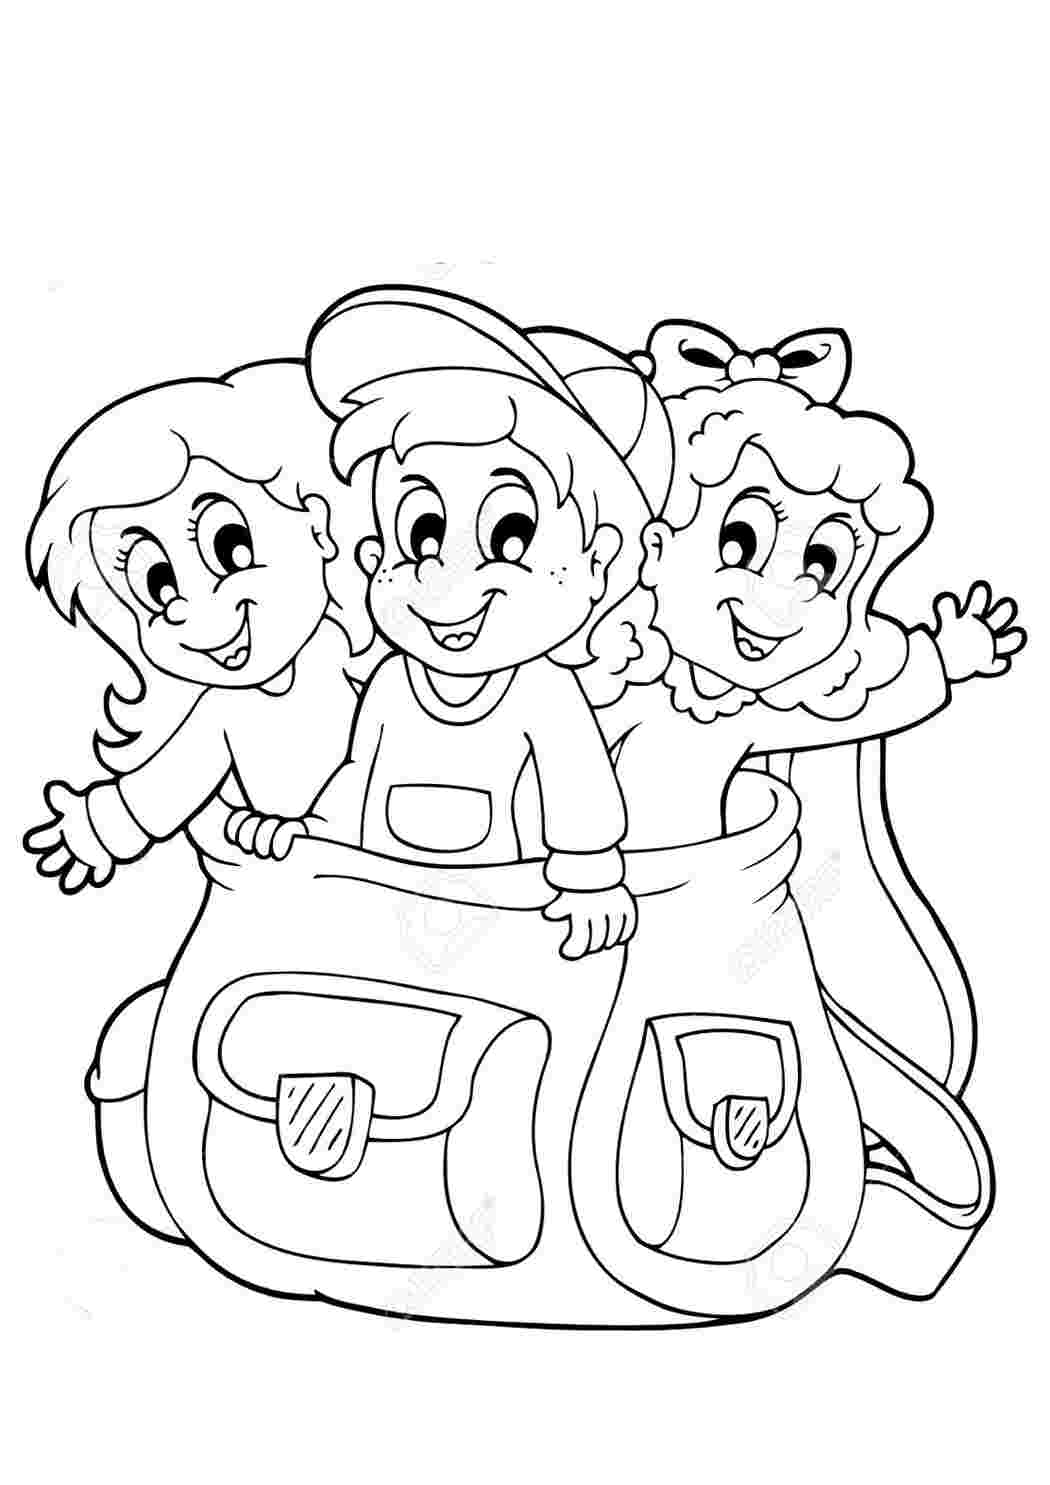 Coloring pages for children and adults with images of people